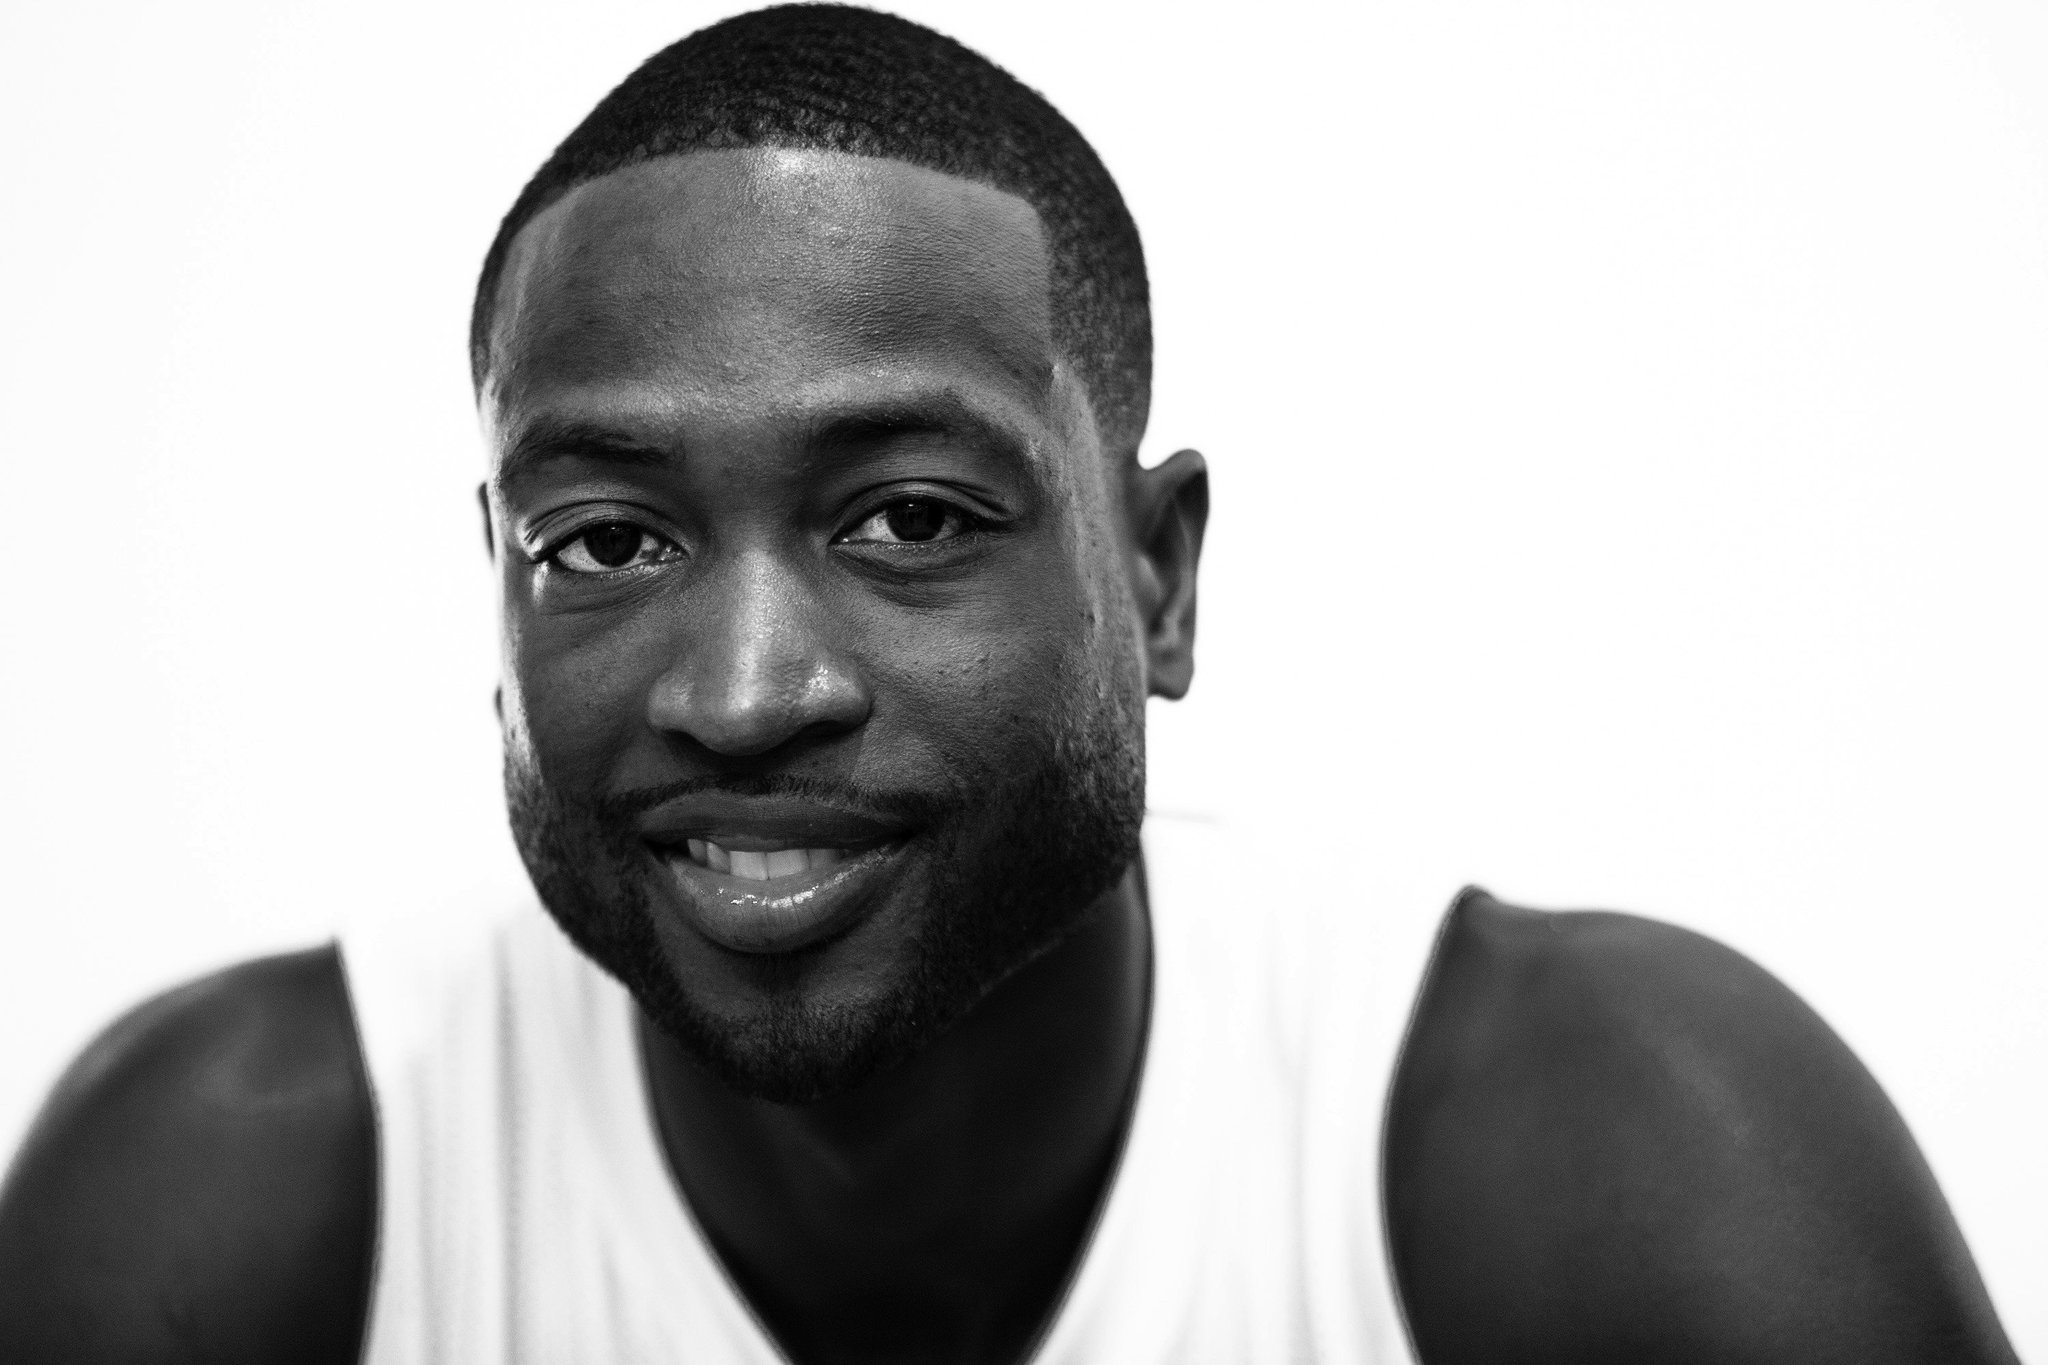 After vowing to give back, Dwyane Wade loses cousin to gun violence - Chicago Tribune